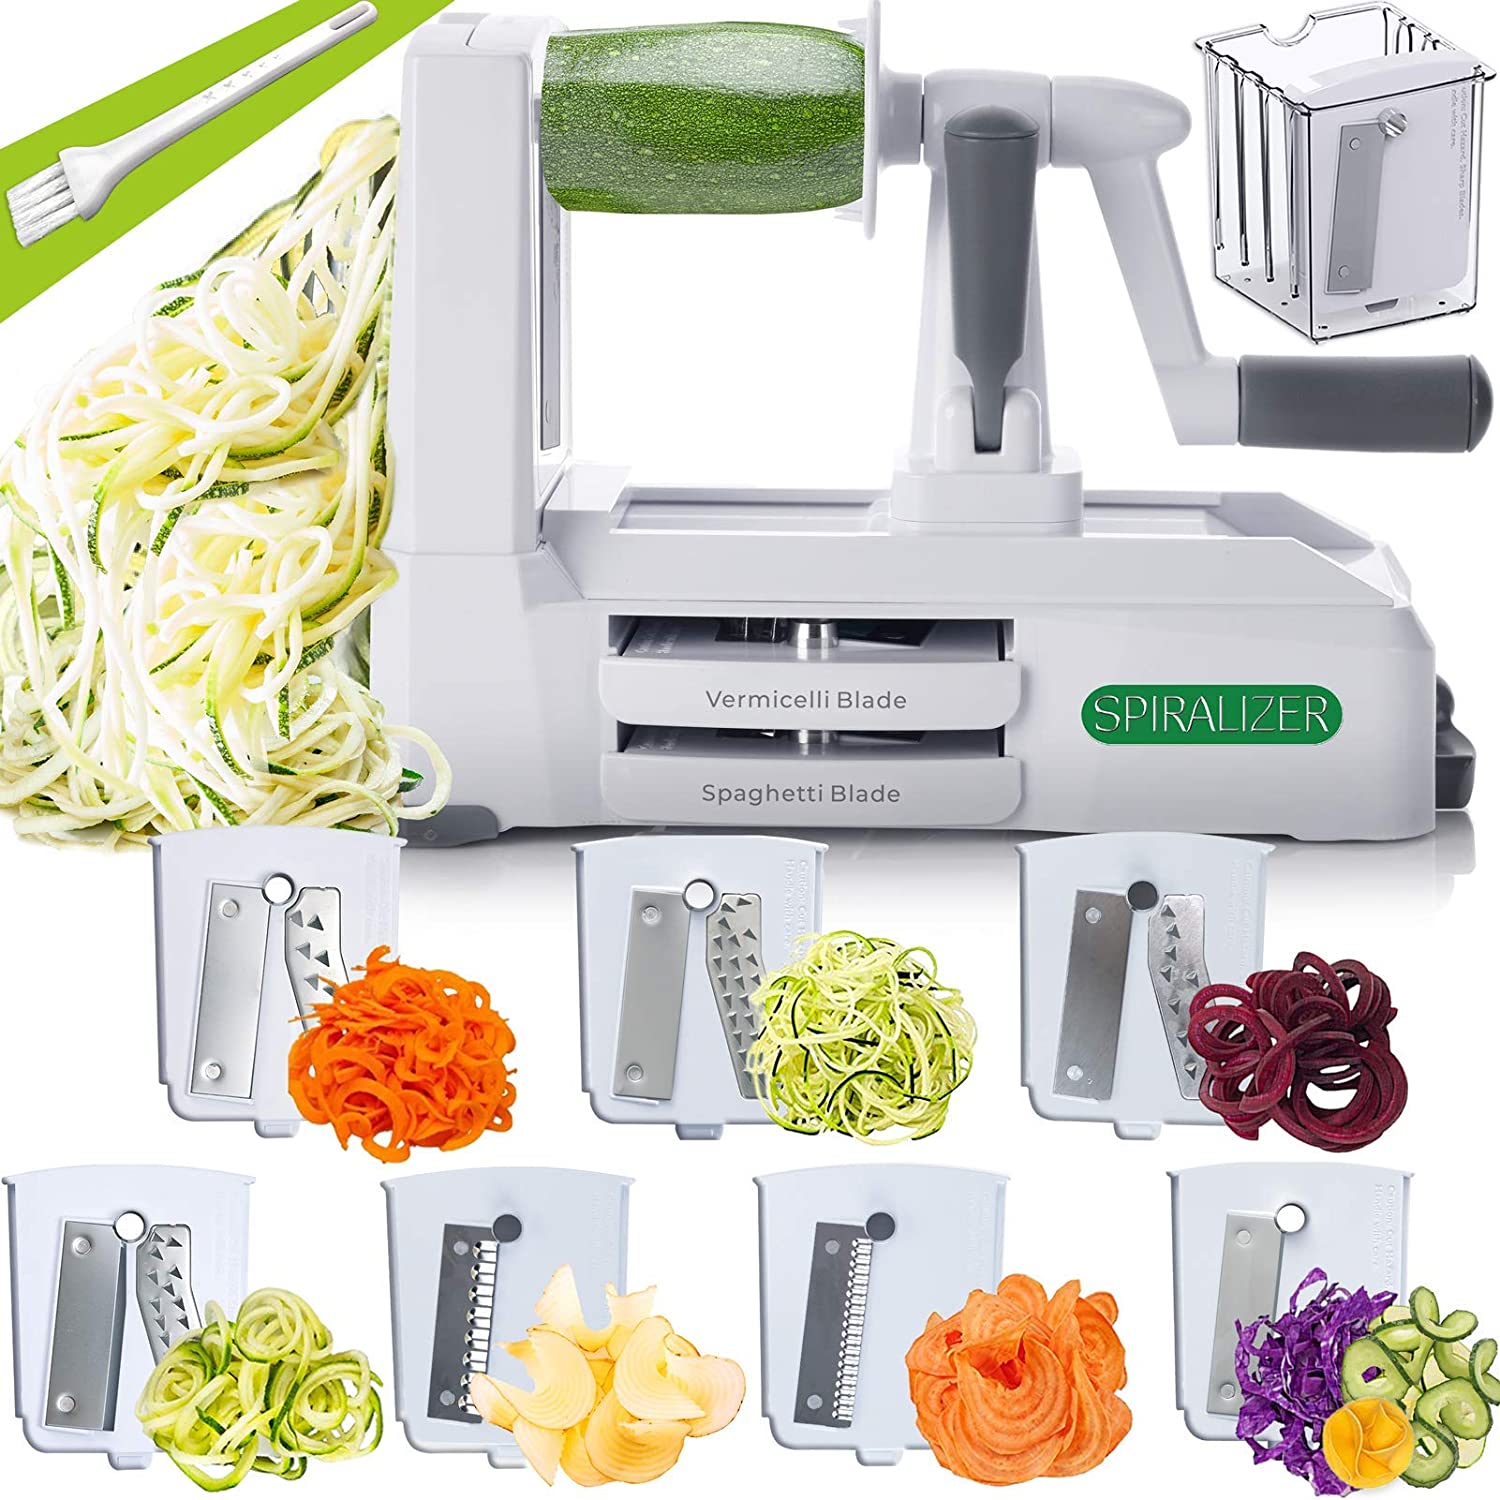 Farberware Spiraletti Vegetable Slicer with Three Colored Blades